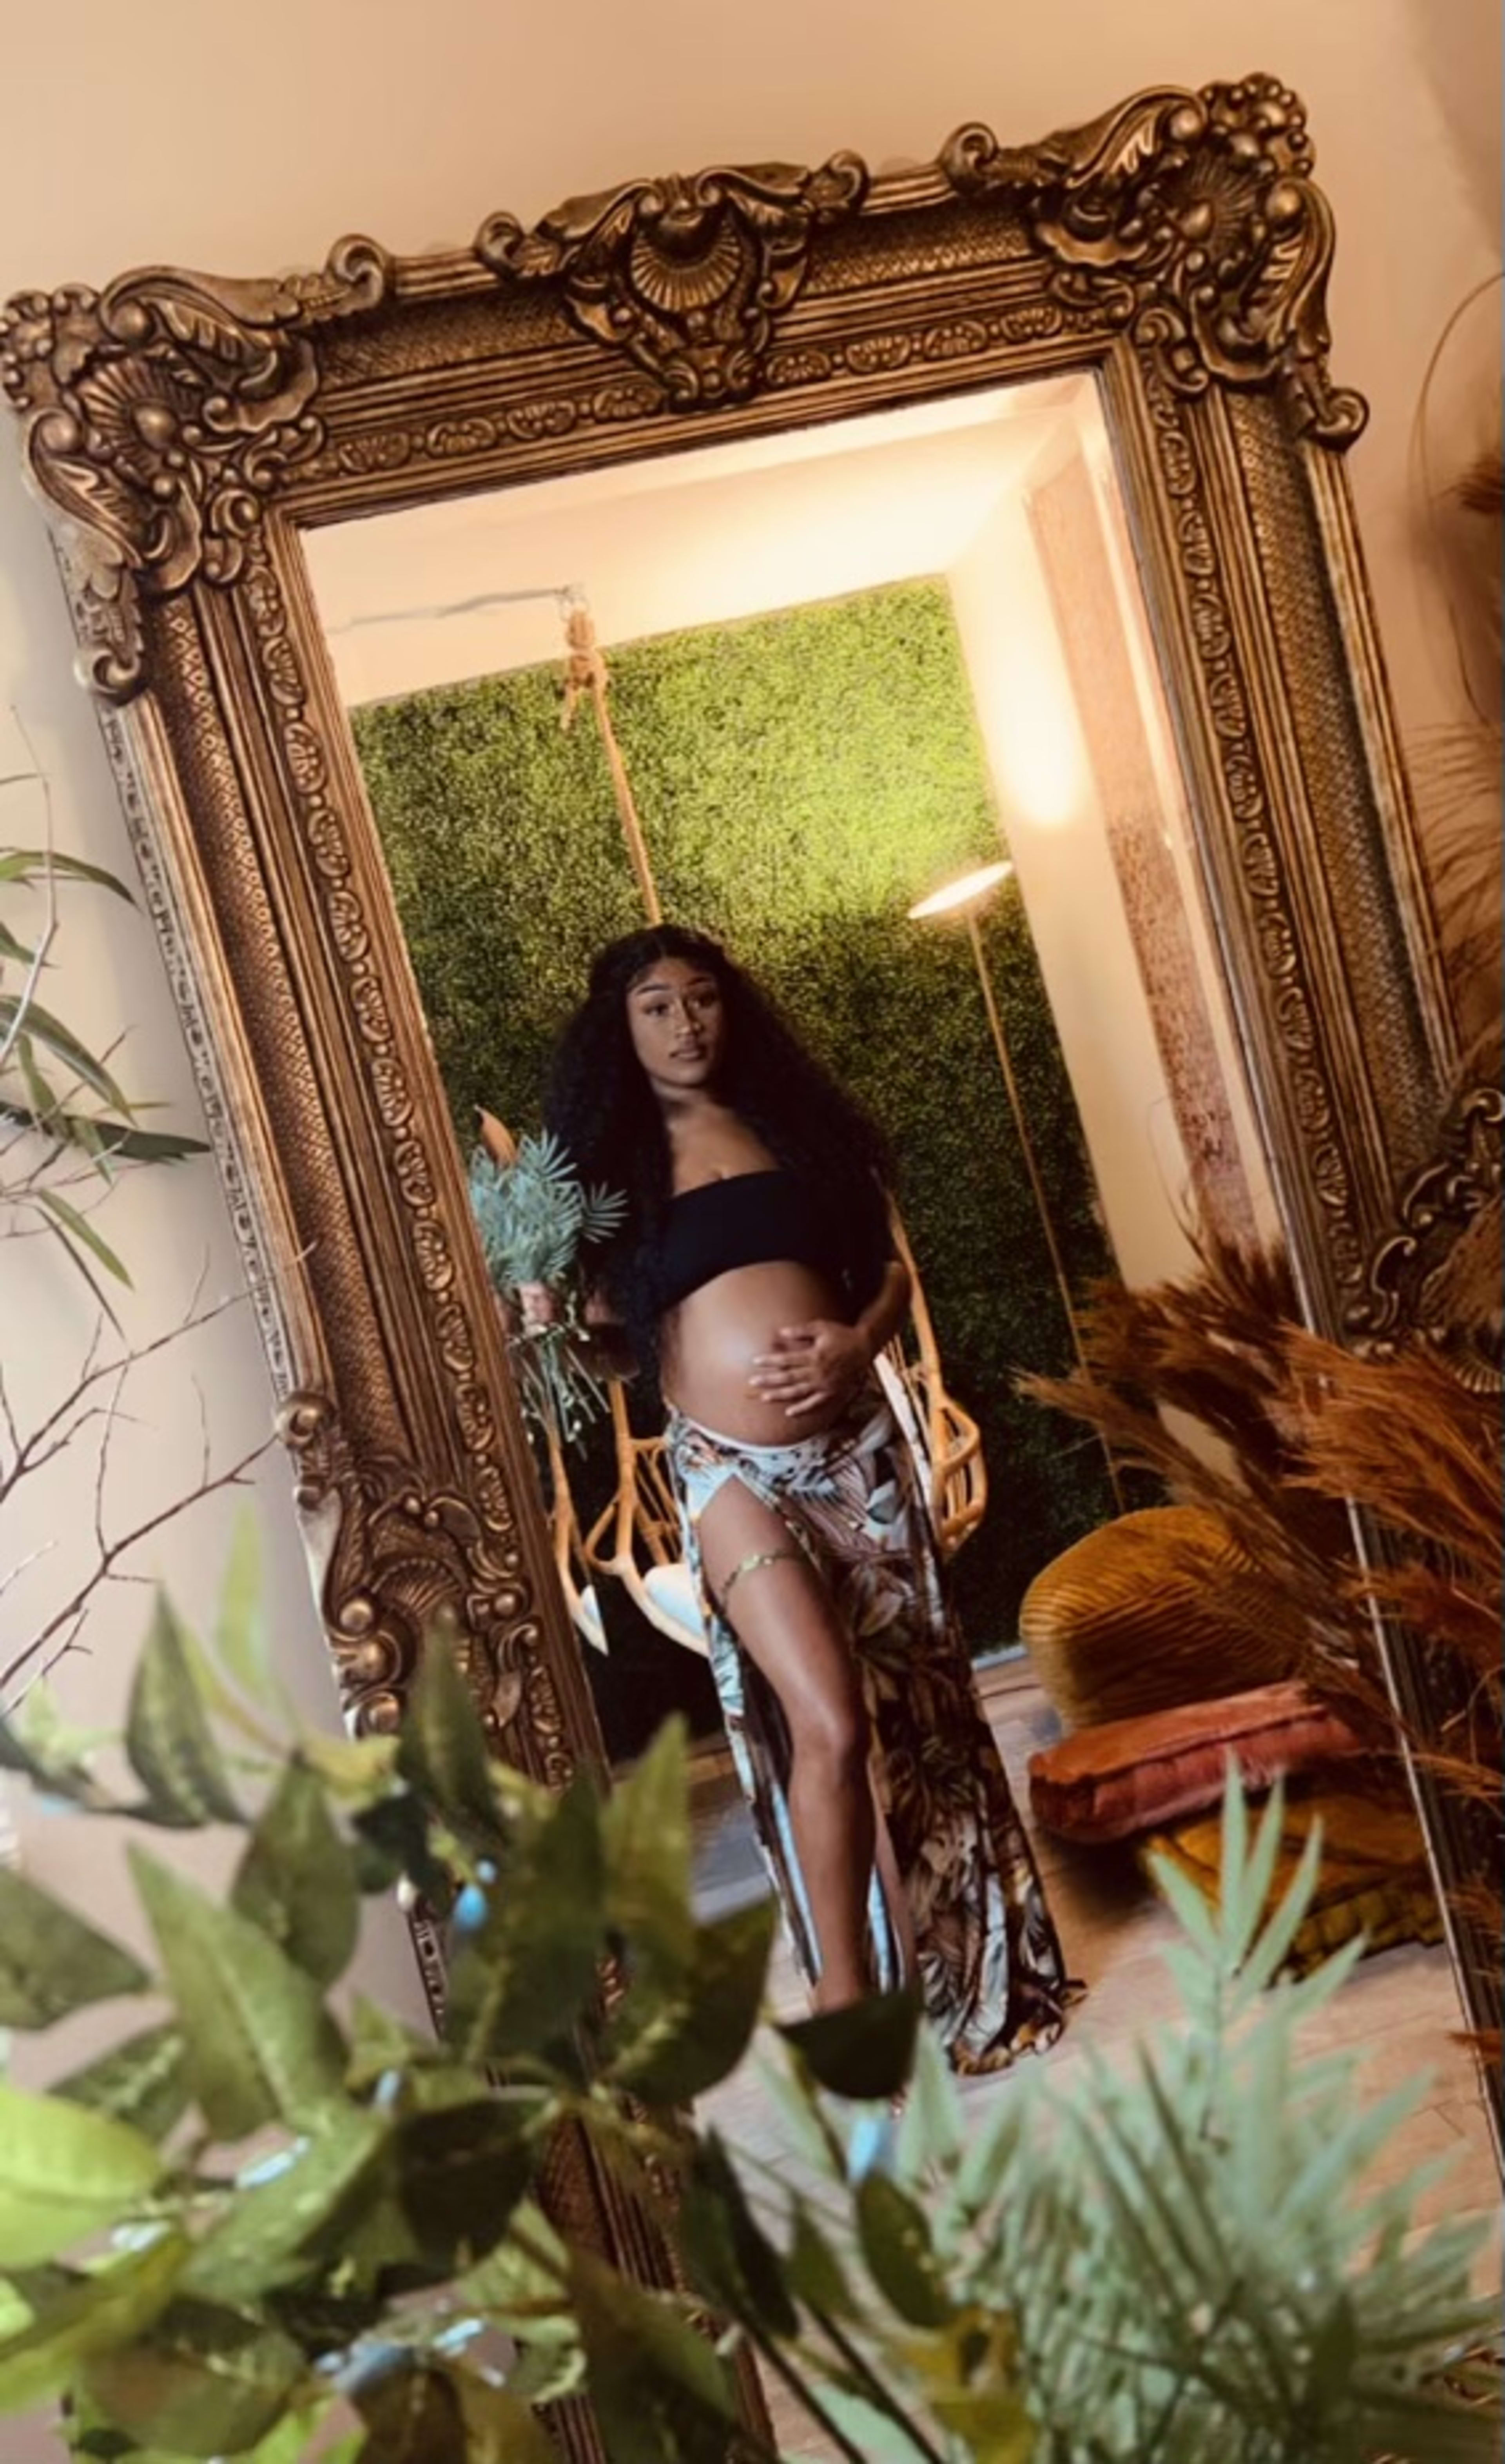 A pregnant woman standing in front of a mirror in a boho setting.